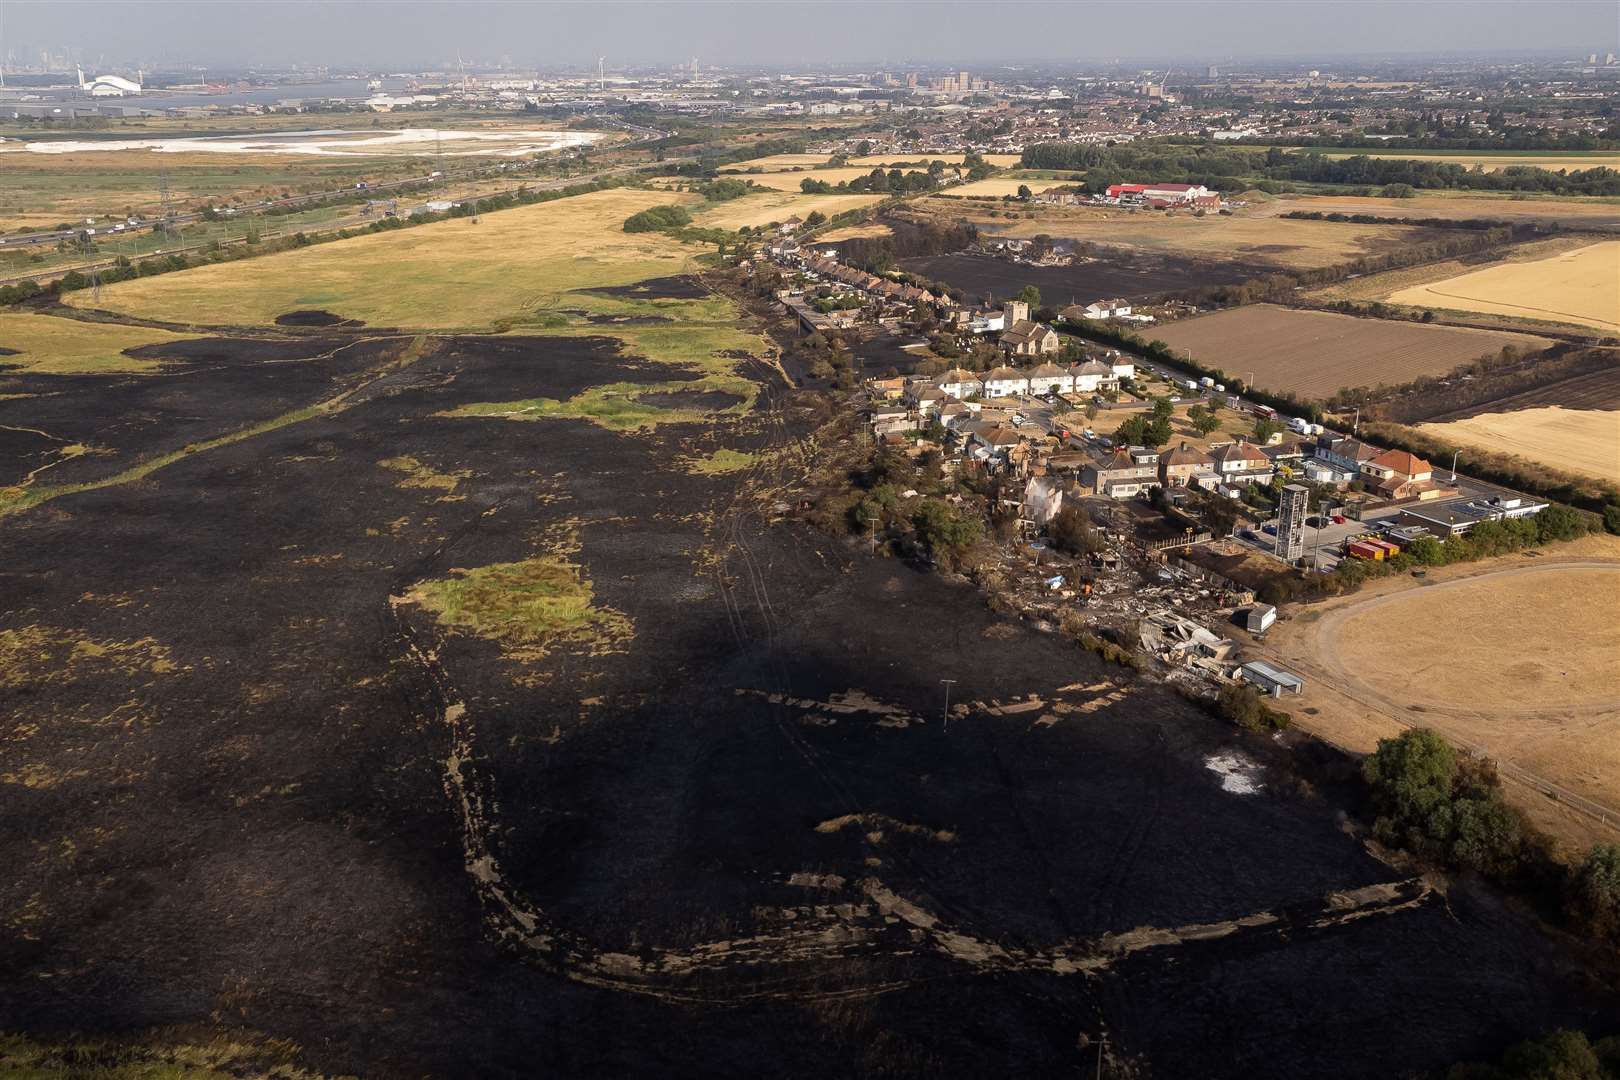 The scene after a wildfire in the village of Wennington, east London, last July (Aaron Chown/PA)